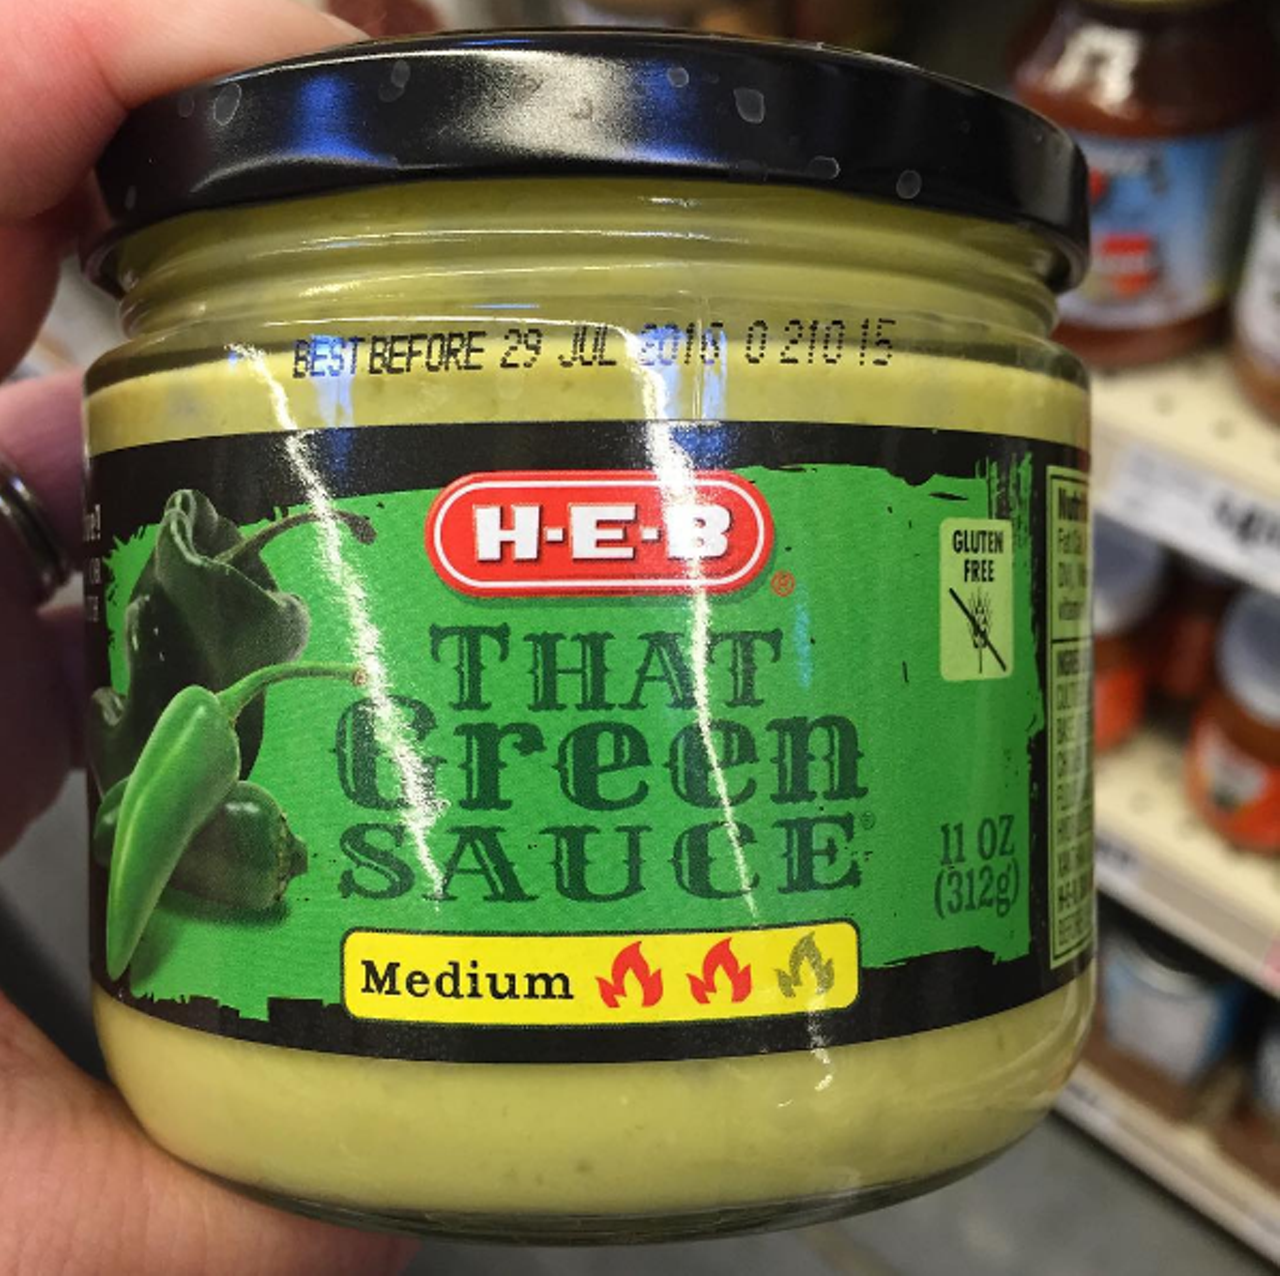 That Green Sauce
It's good on everything: over eggs for chilaquiles, dipped in chips, etc. Put it on fish tacos or over nachos for best results. Who, besides HEB, could create such a magical sauce?
Photo via Instagram, redneckcutie